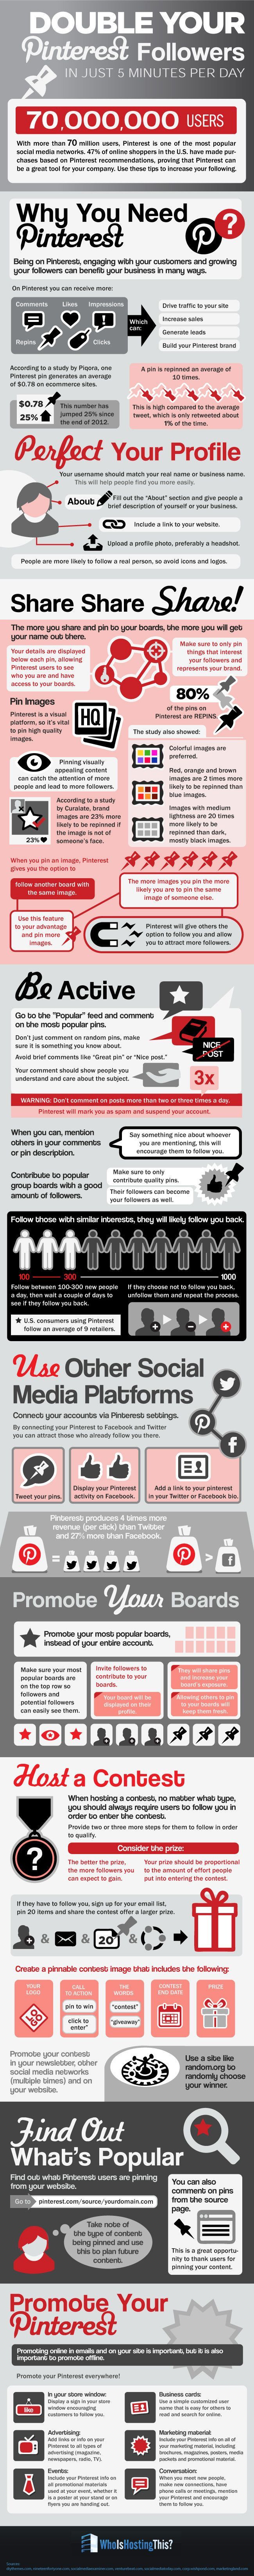 How To Promote Your Business With Pinterest &#8211; infographic